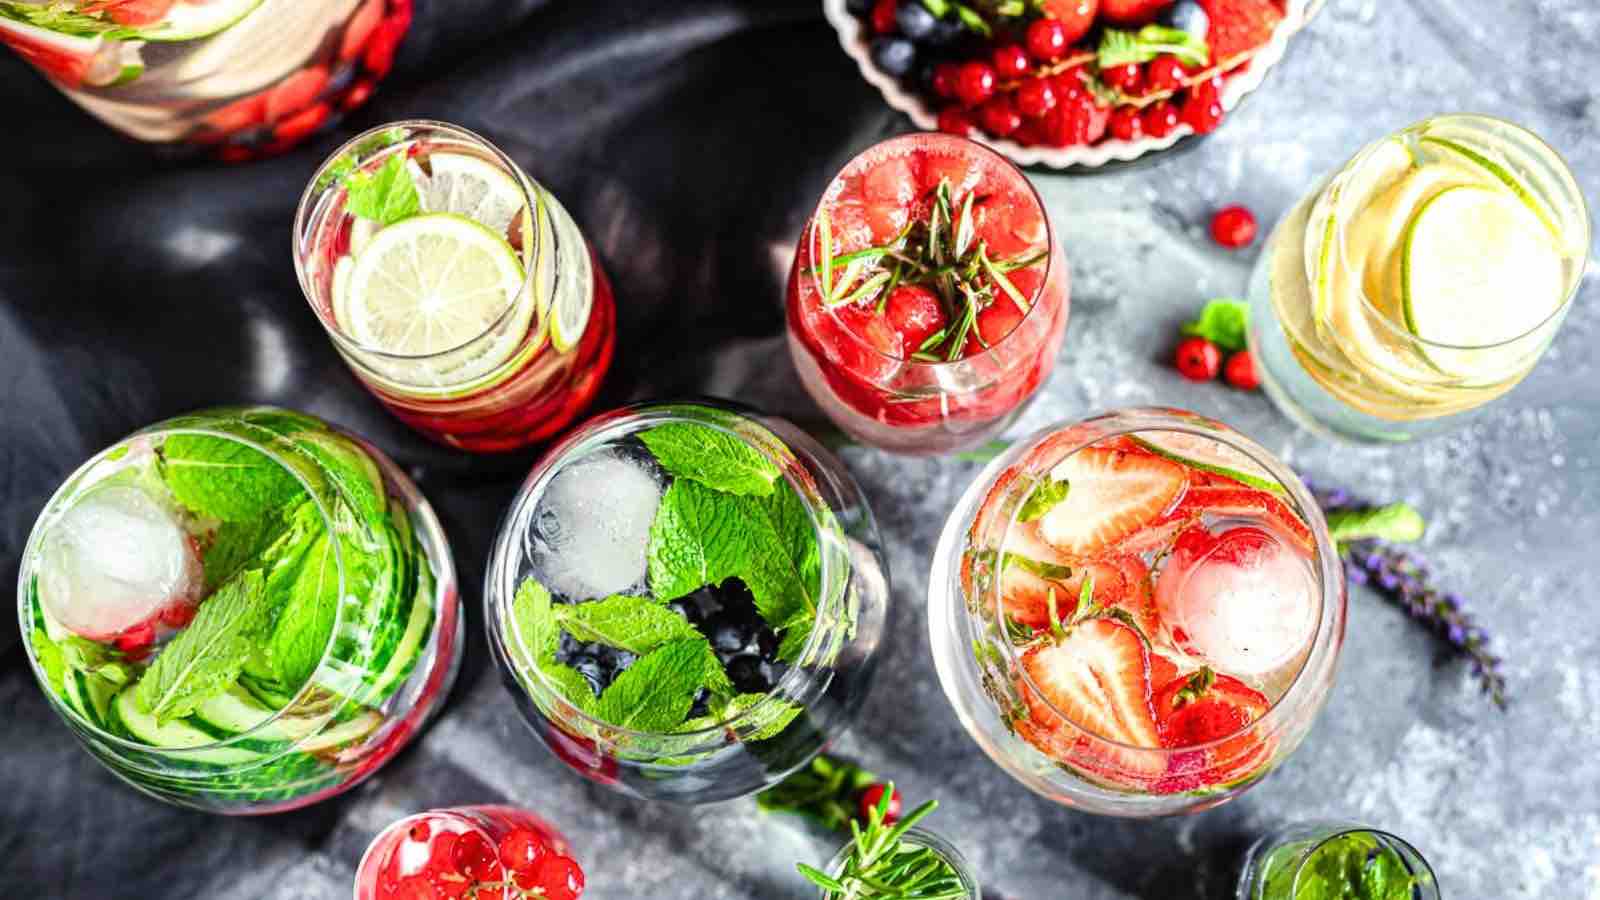 Assorted fruit-infused beverages with fresh mint, berries, and citrus slices, served in clear glasses on a dark, textured surface.